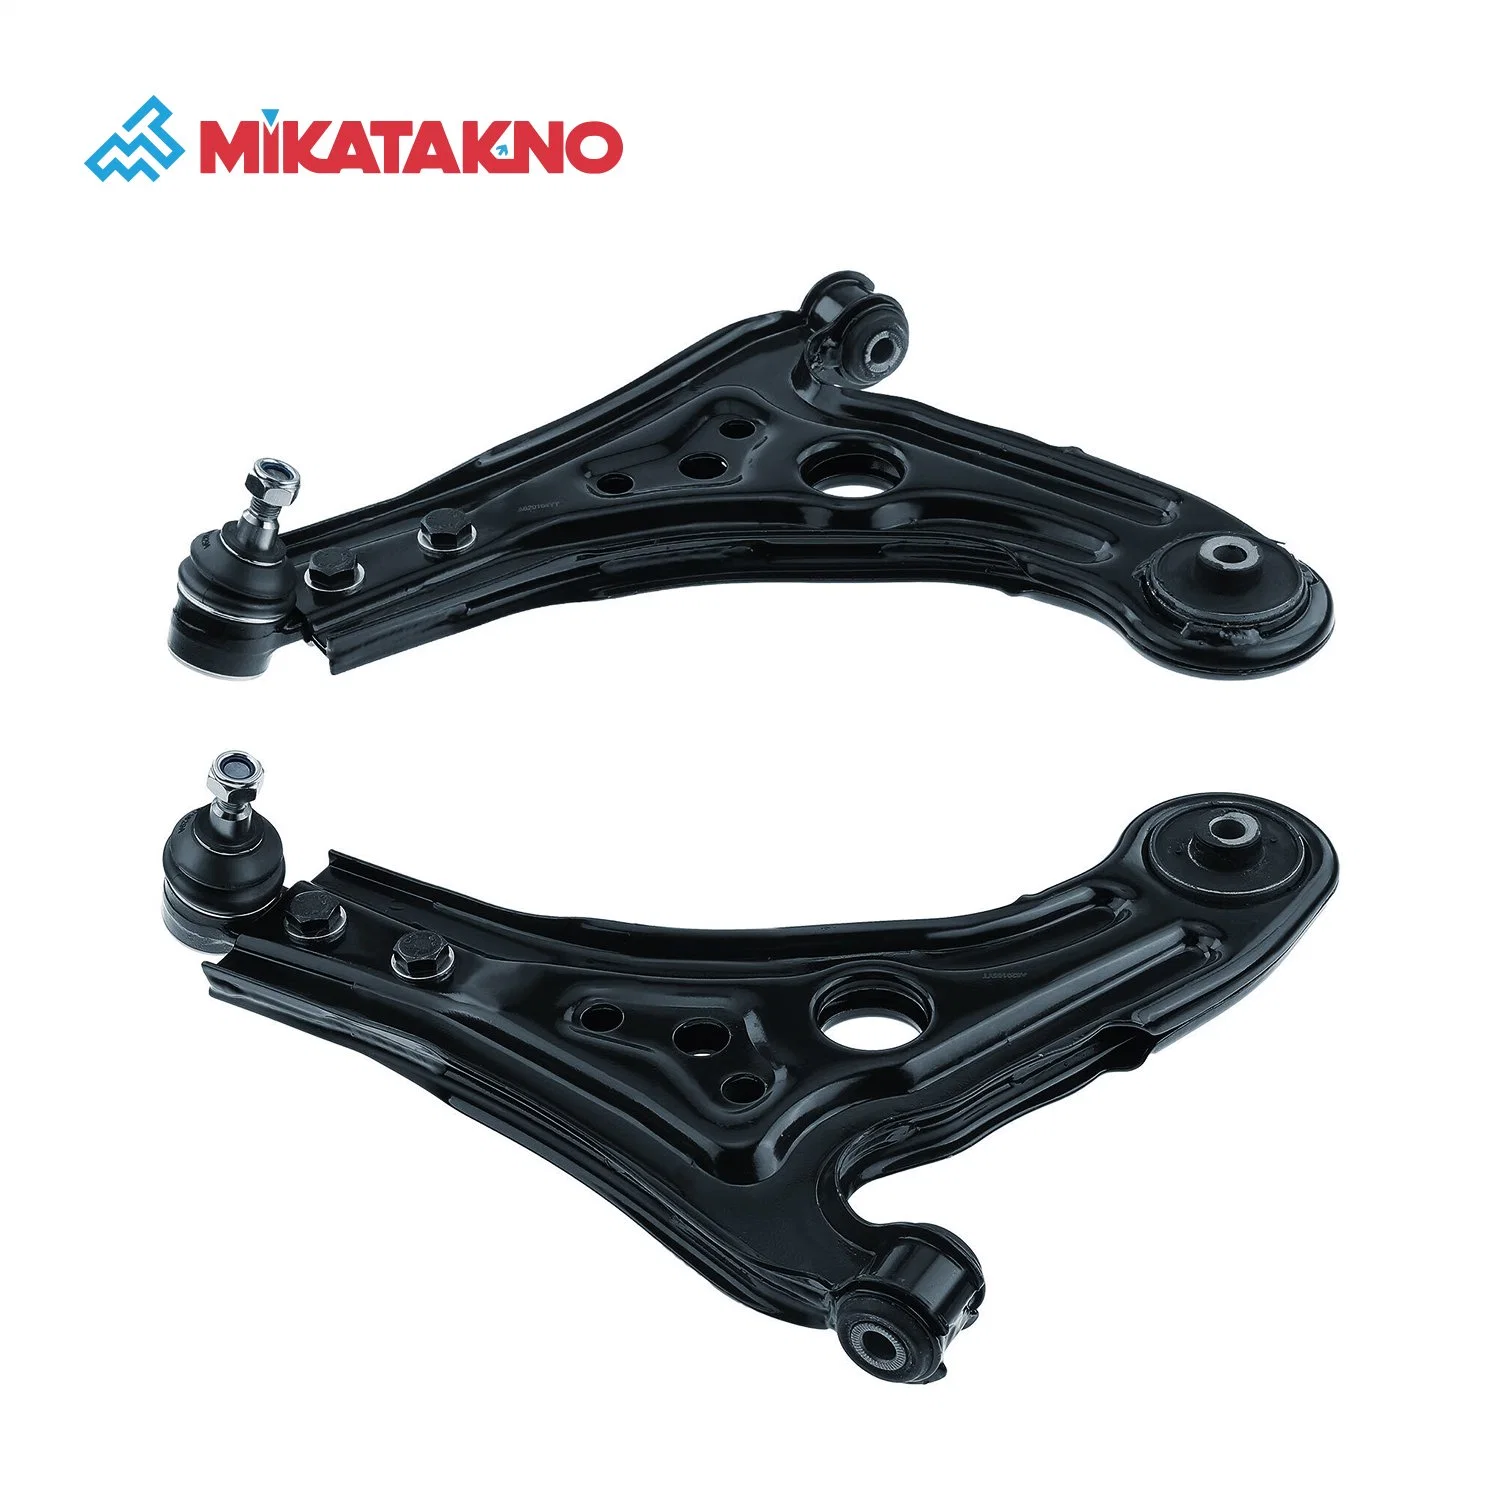 Mikatakno Control Arms 96870466 for Chevrolet Aveo Saloon in High quality/High cost performance 